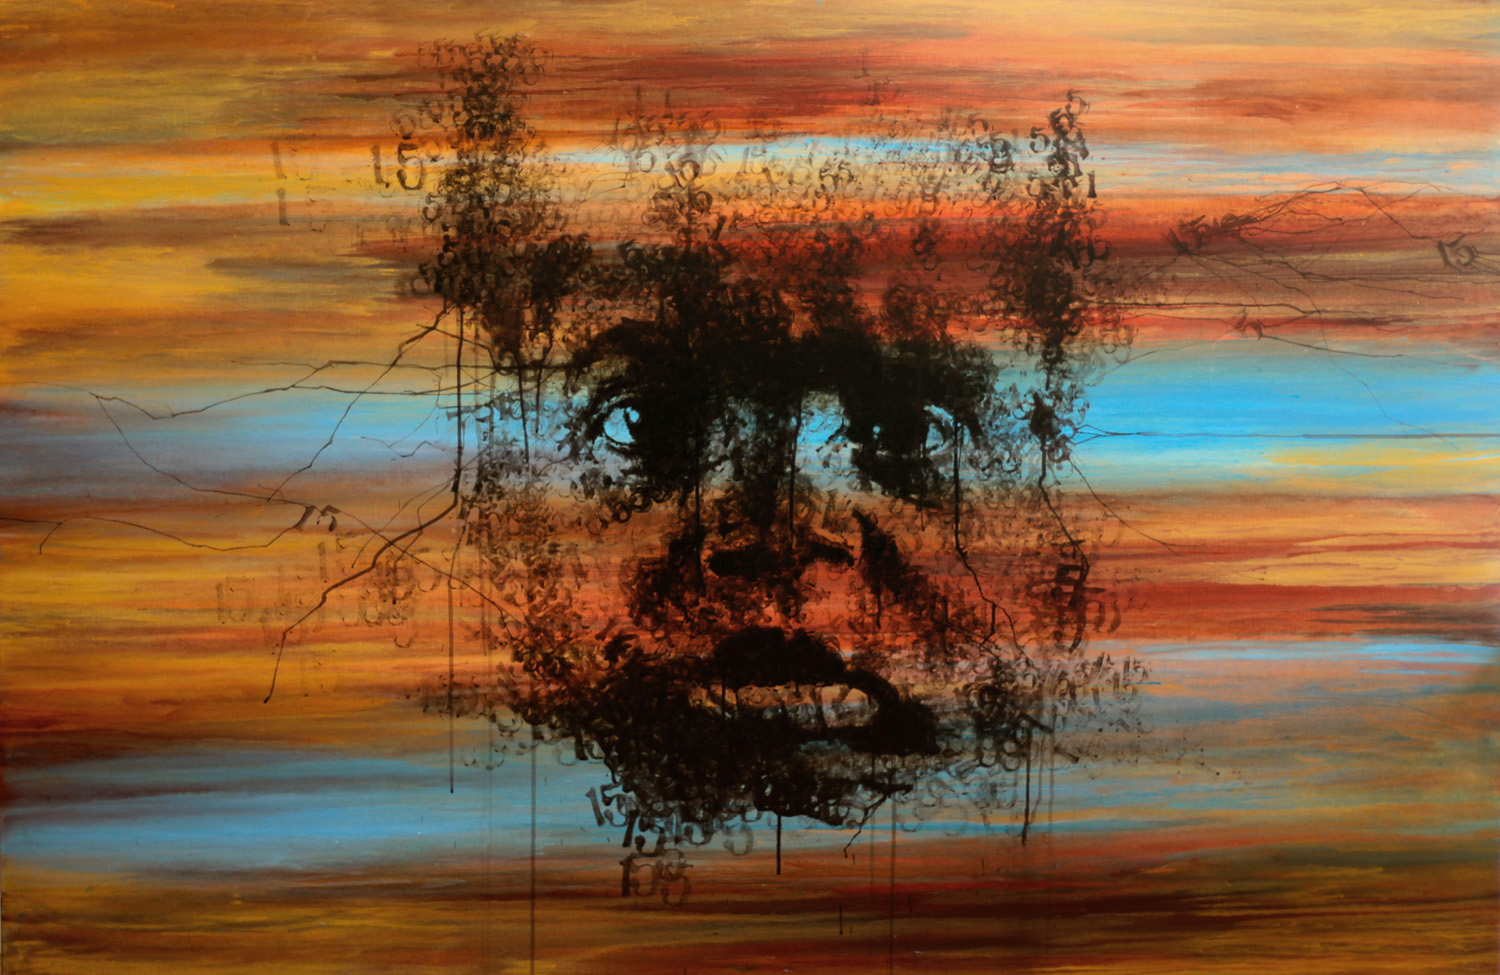 'Kimberley Dreaming', 2015, potato stamp, ink and acrylic on canvas, 120 x 180 cm